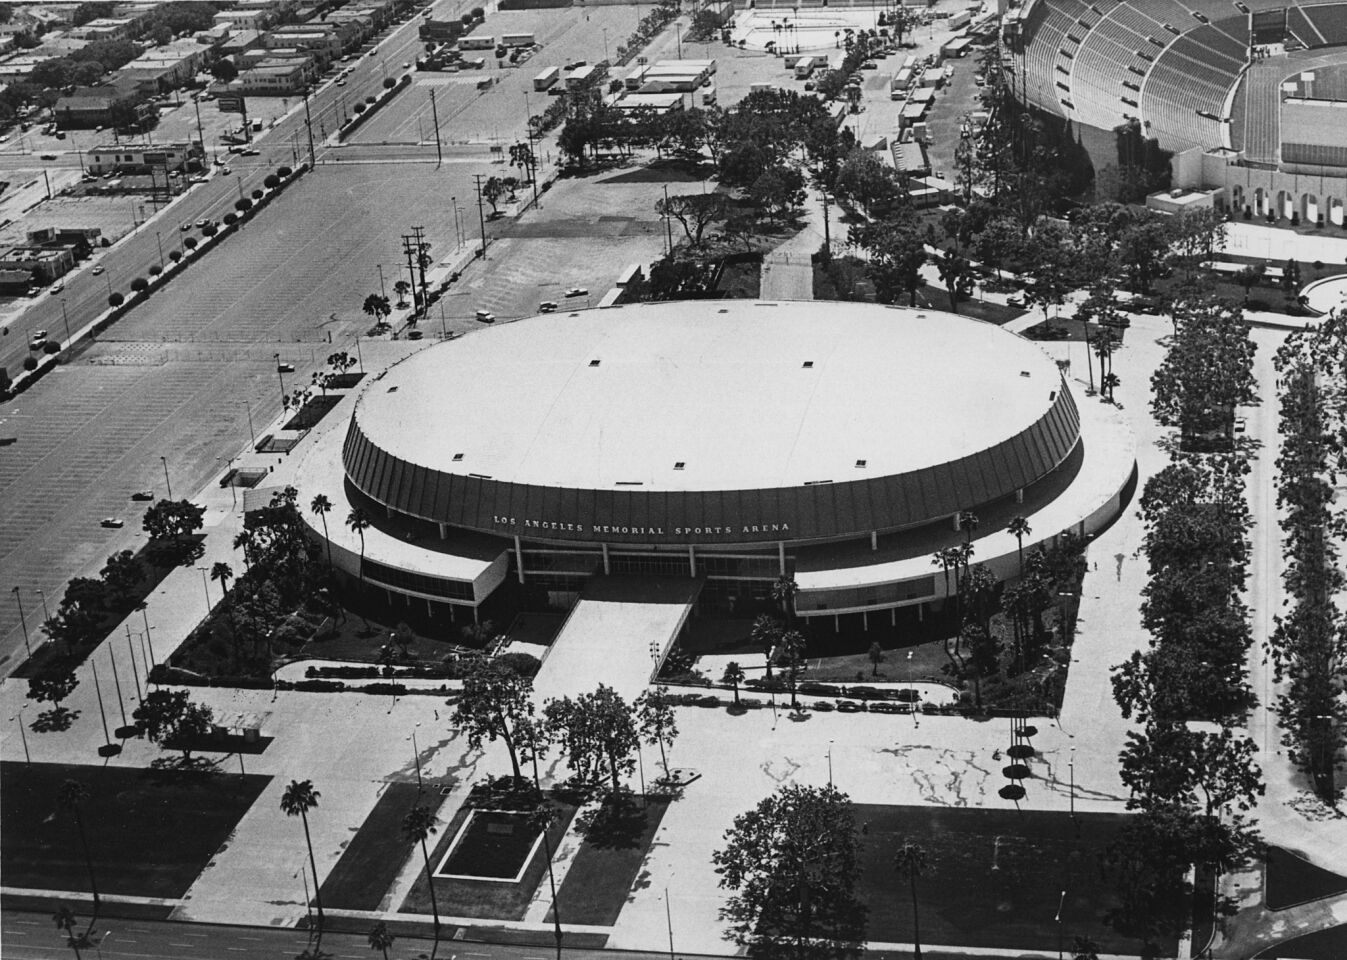 Los Angeles Sports Arena events through the years